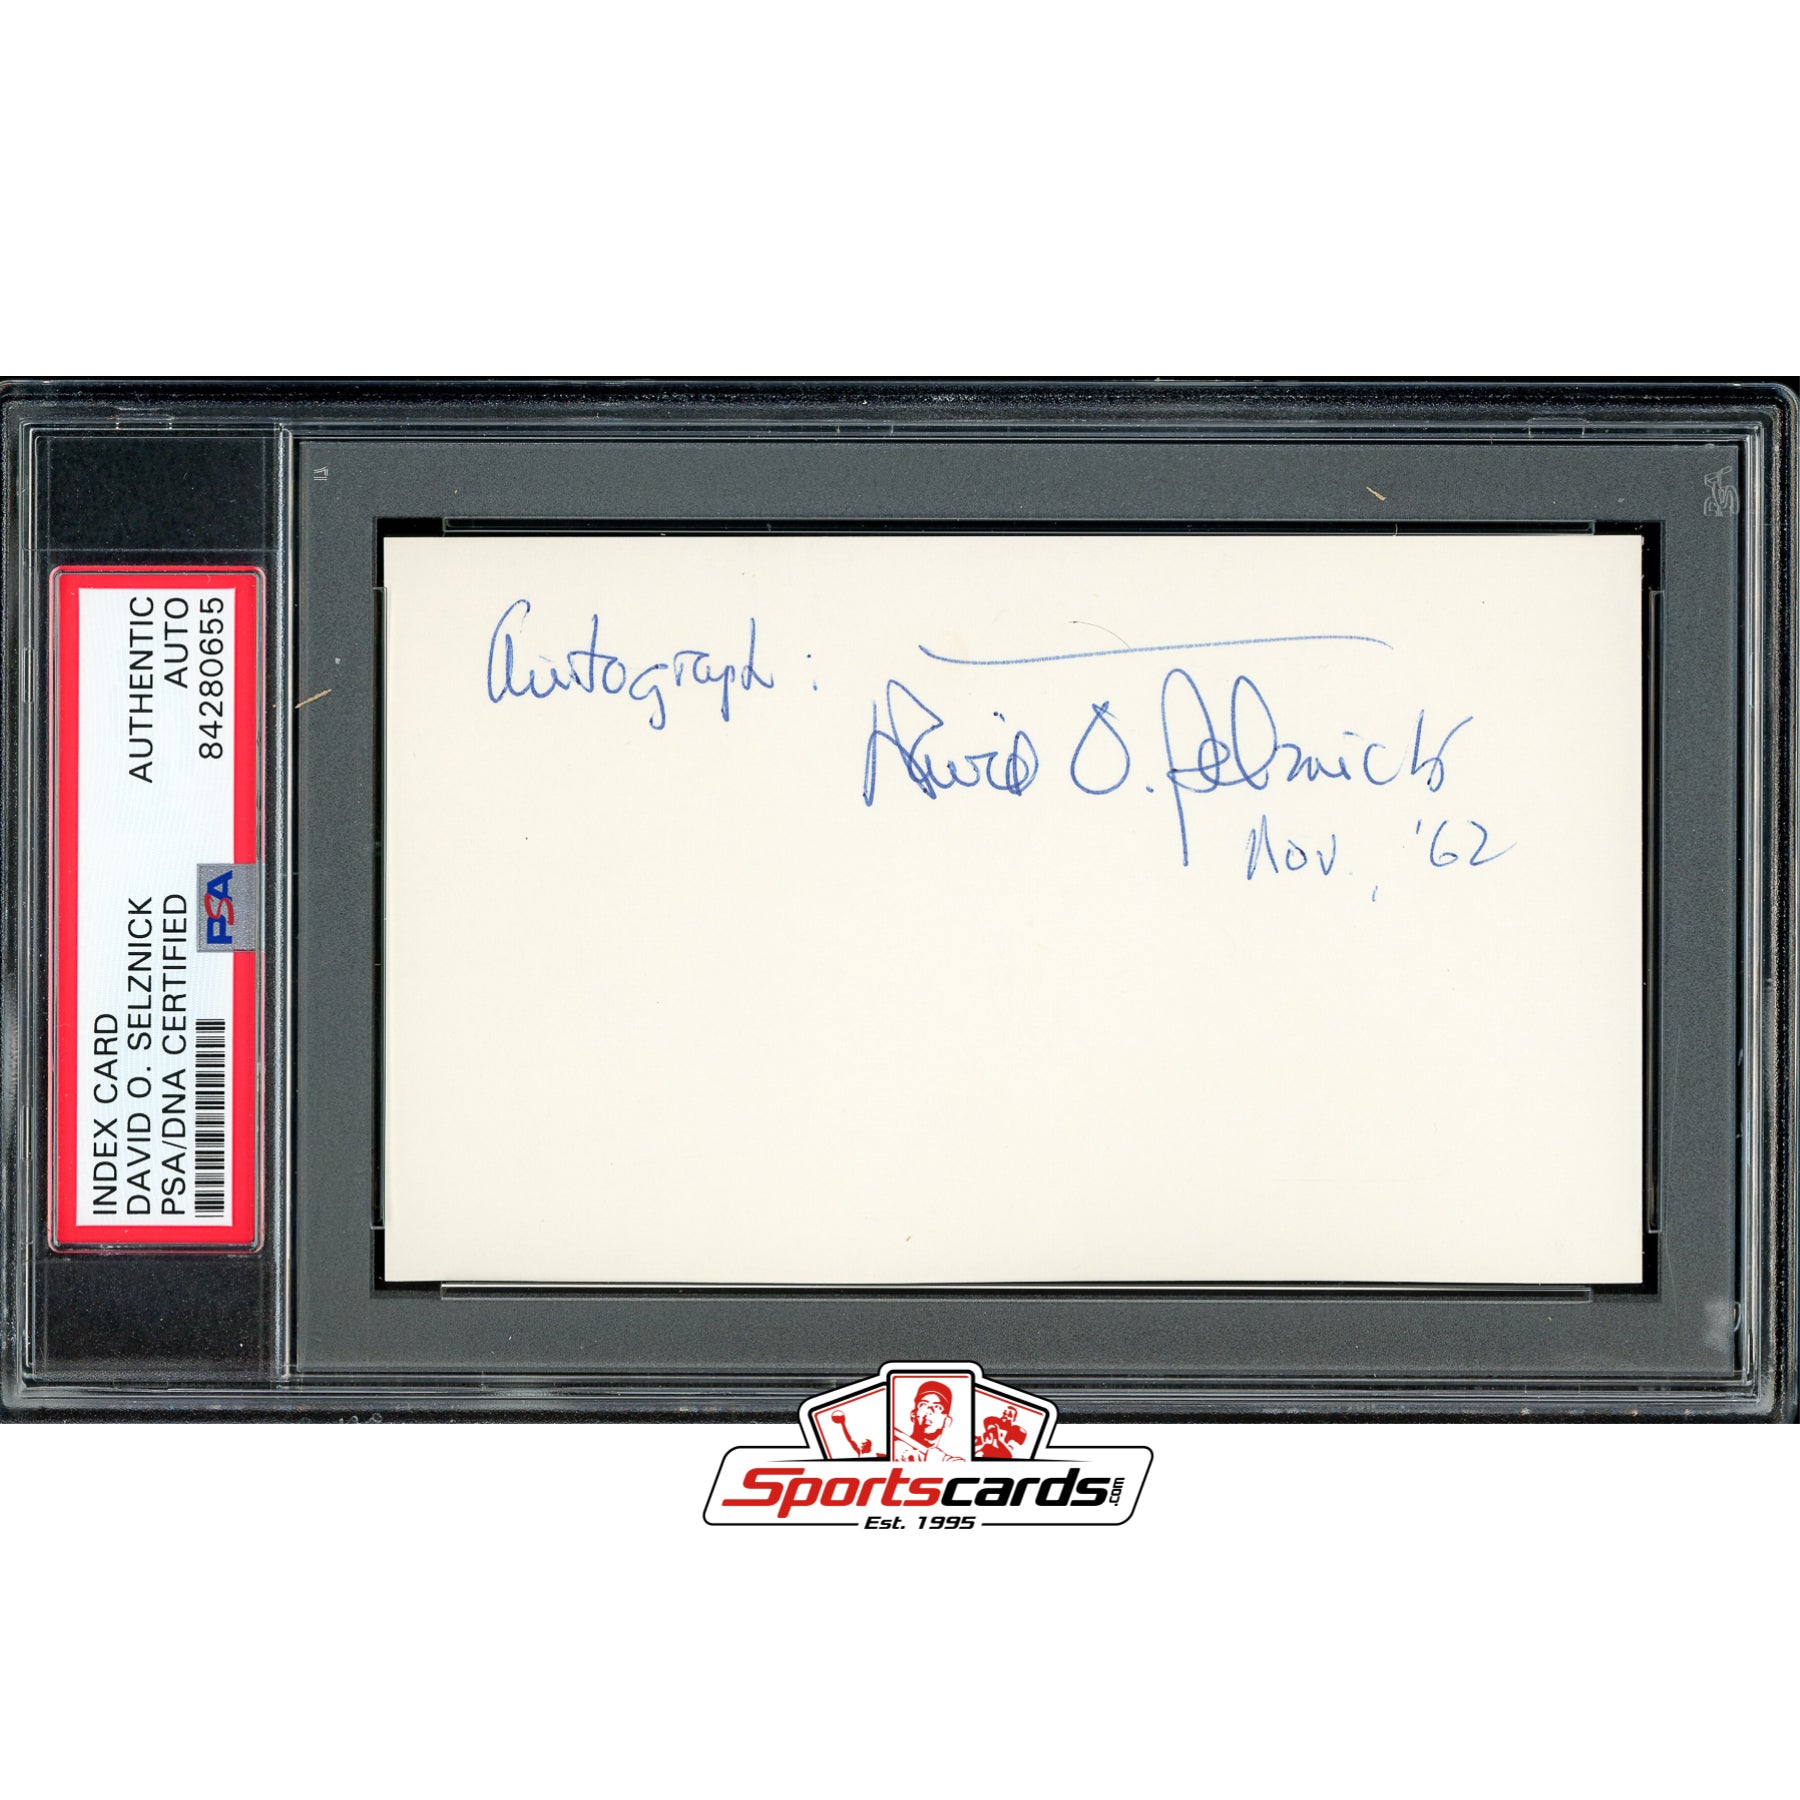 David O. Selznick Signed 3x5 Autograph PSA/DNA Gone With The Wind